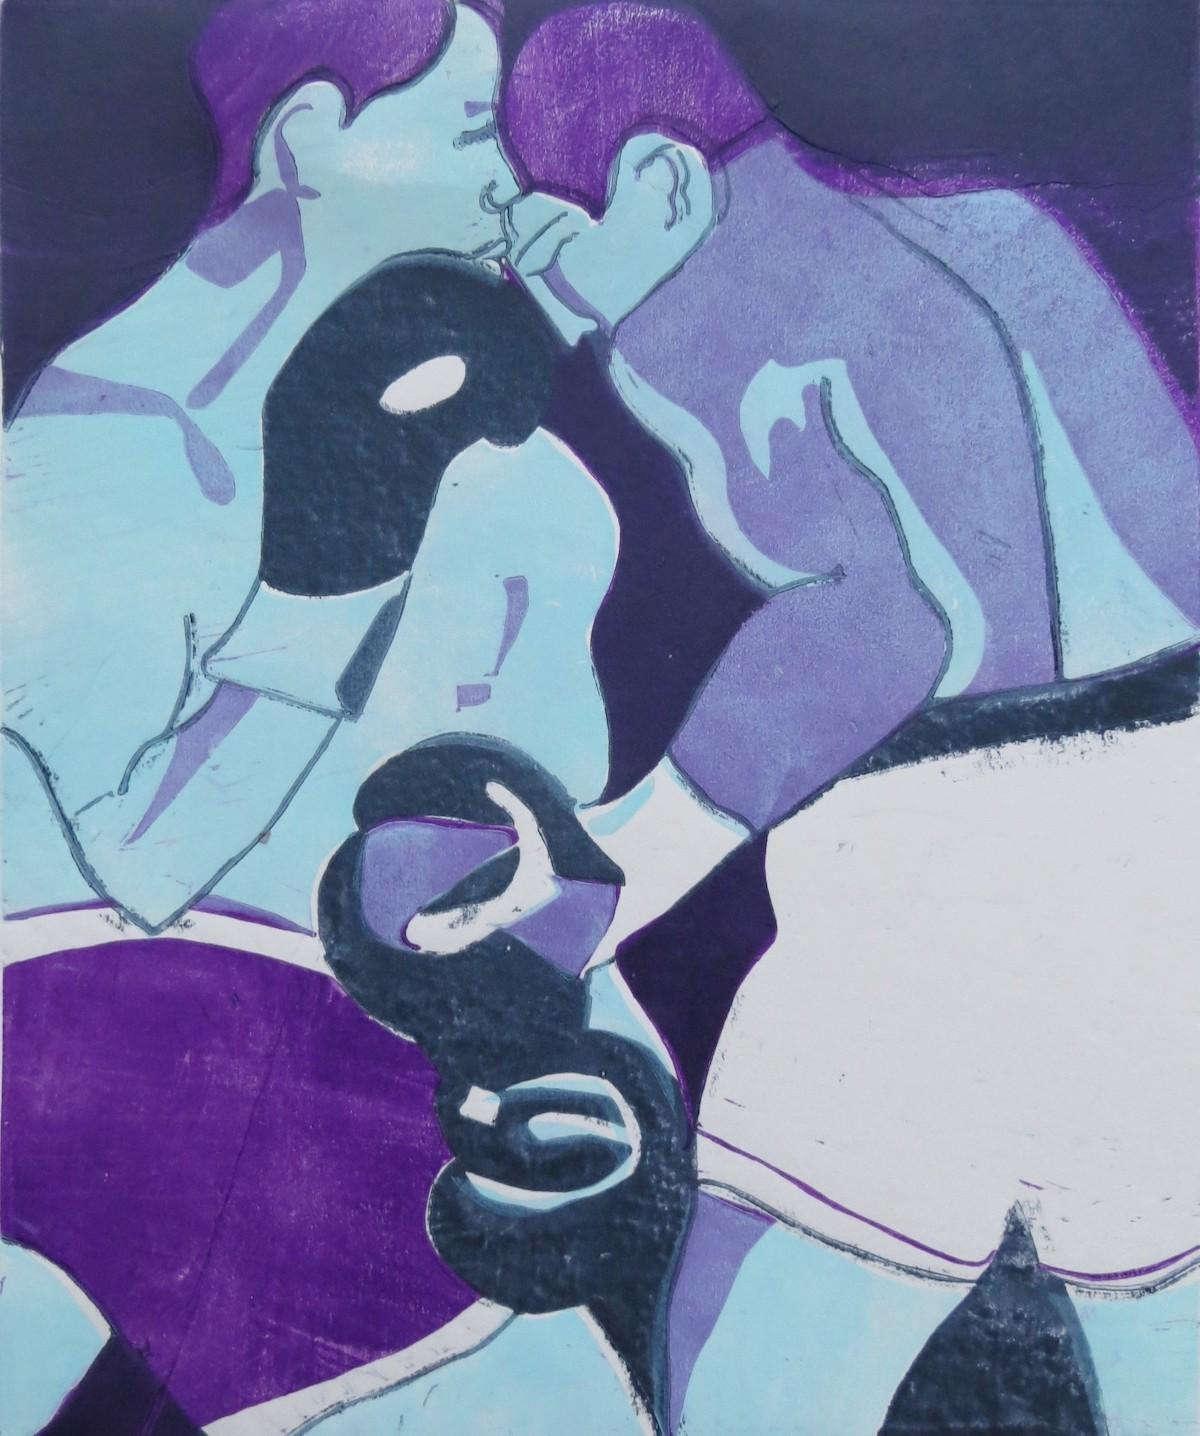 In the Ring (Violet) by Lisa Takahashi
Limited edition print and hand signed by the artist 
Sold unframed 
Image size: H:40cm x W:30cm
Complete size fo unframed work: H:40cm x W:30cm x D:0.1cm 
Please note that insitu images are purely an indication